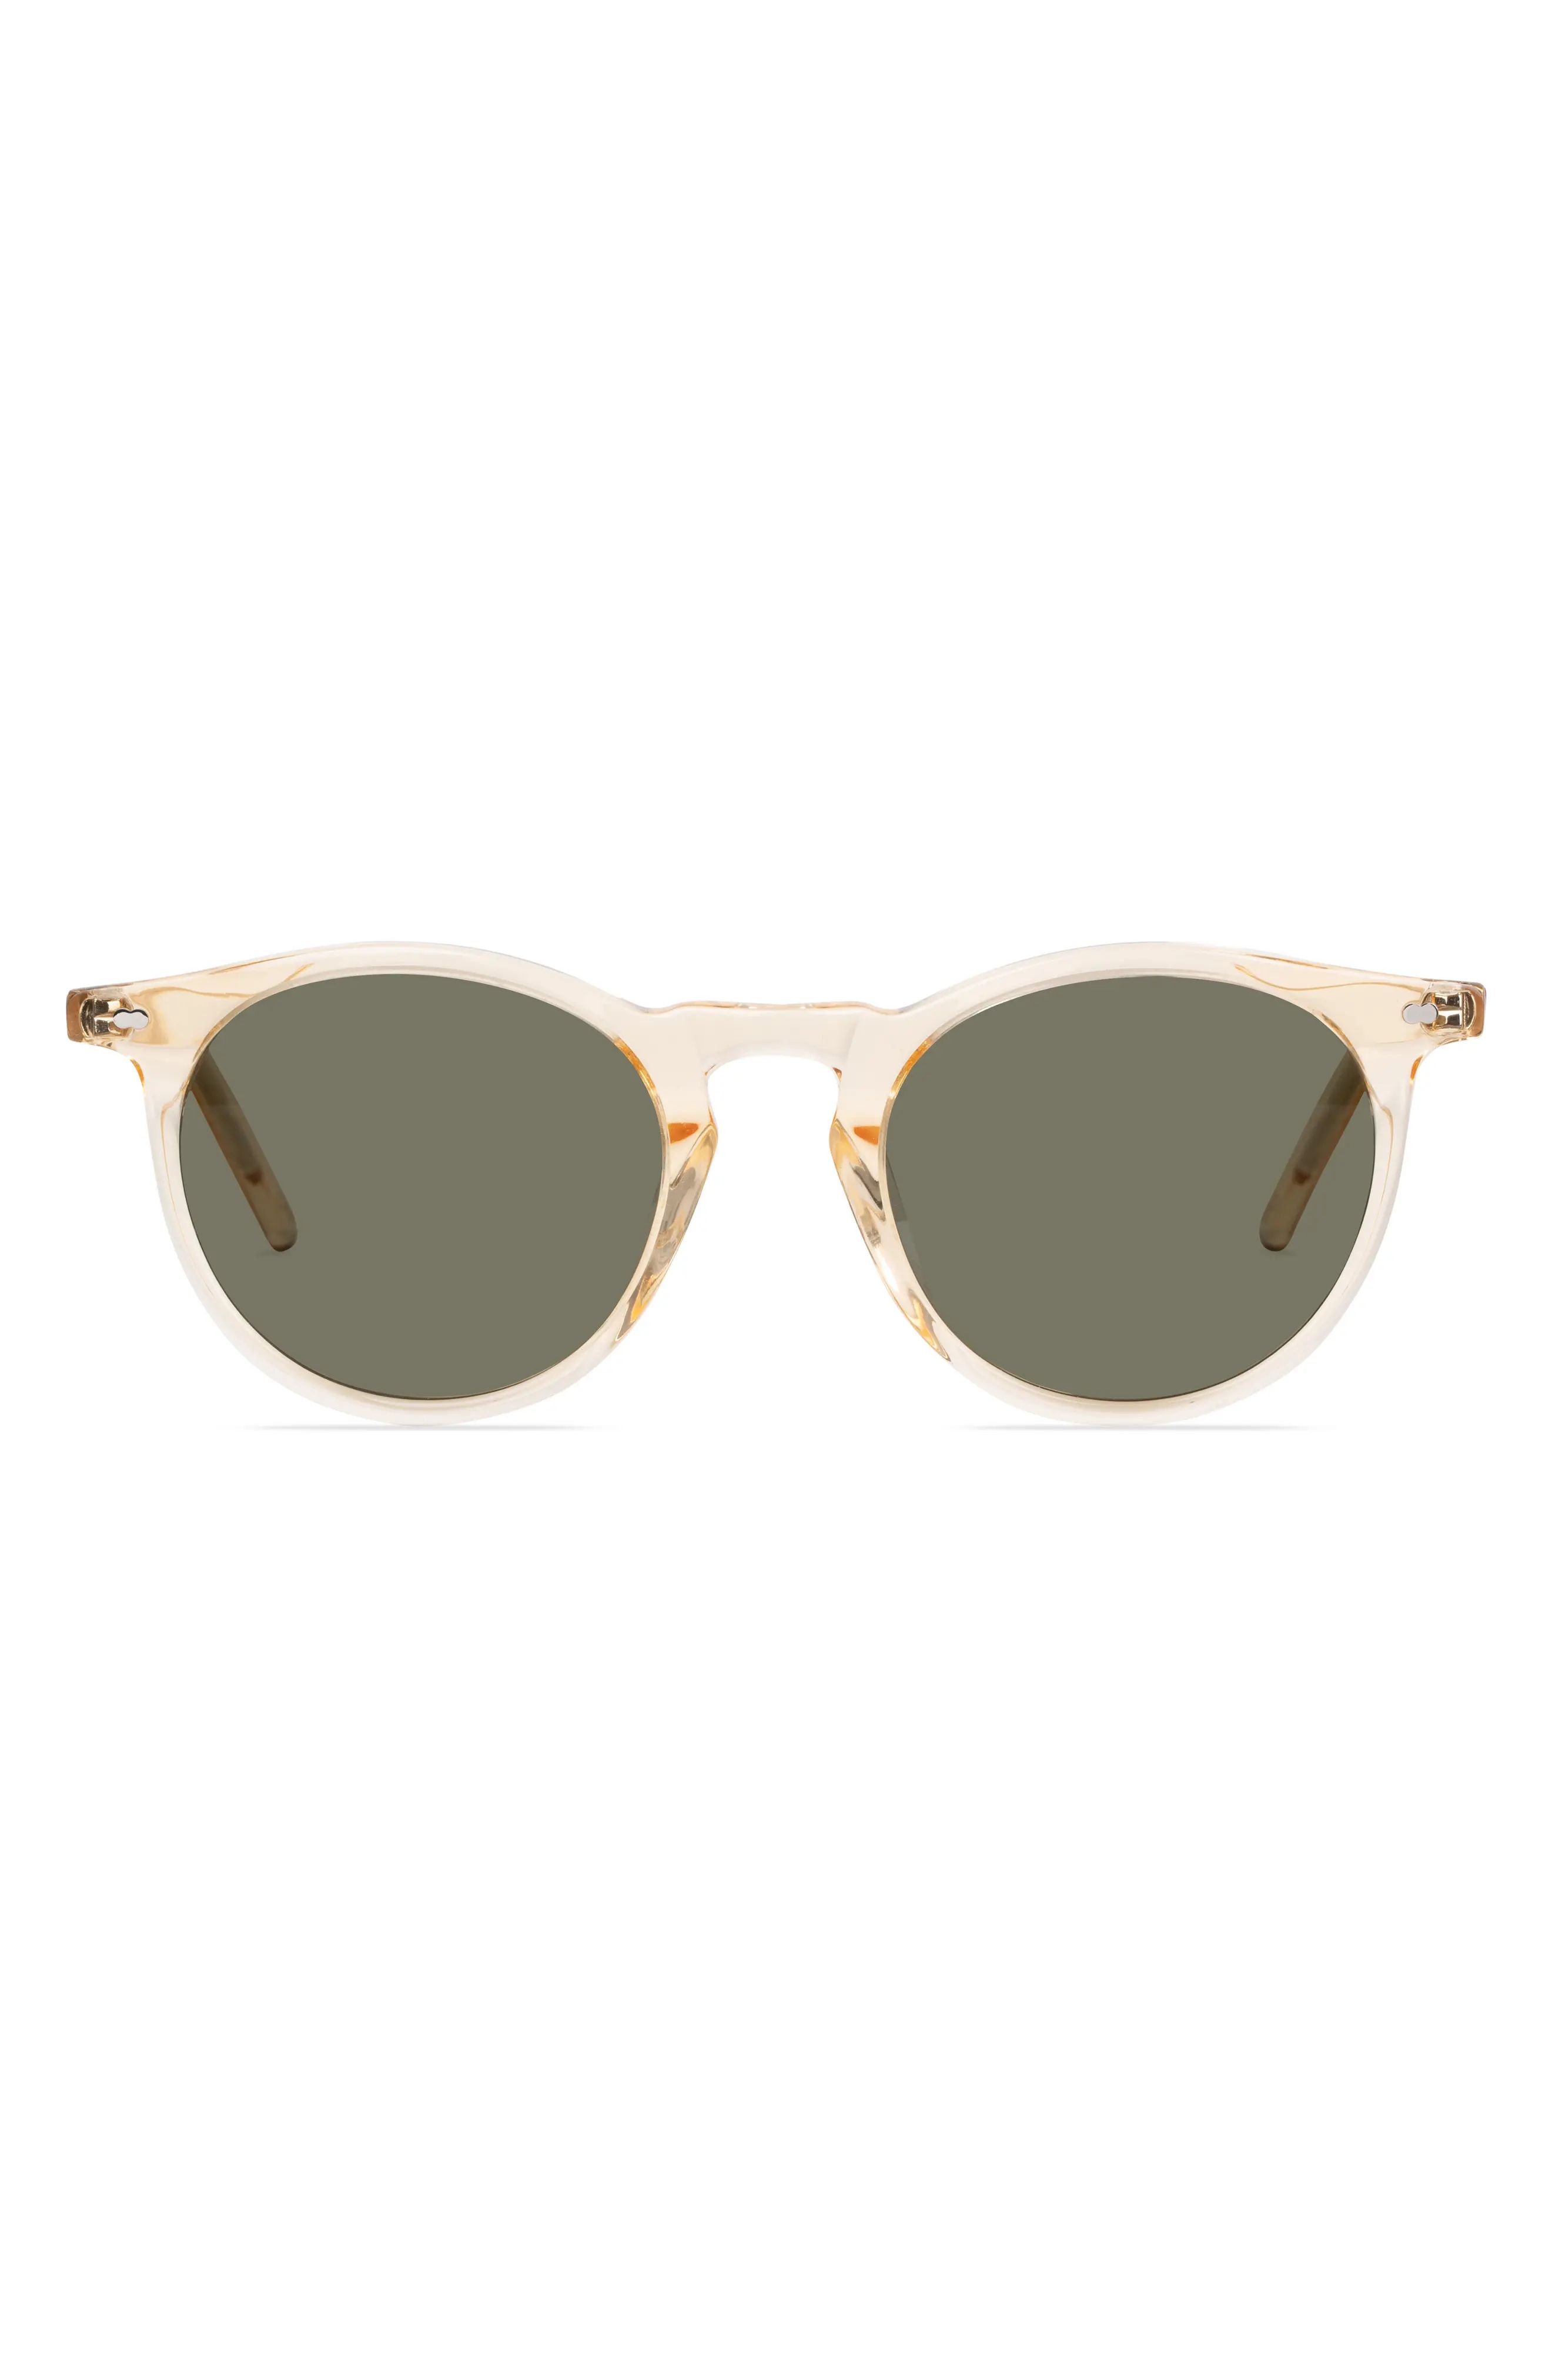 Christopher Cloos Paloma 49mm Polarized Round Sunglasses in Champagne/Black at Nordstrom | Nordstrom